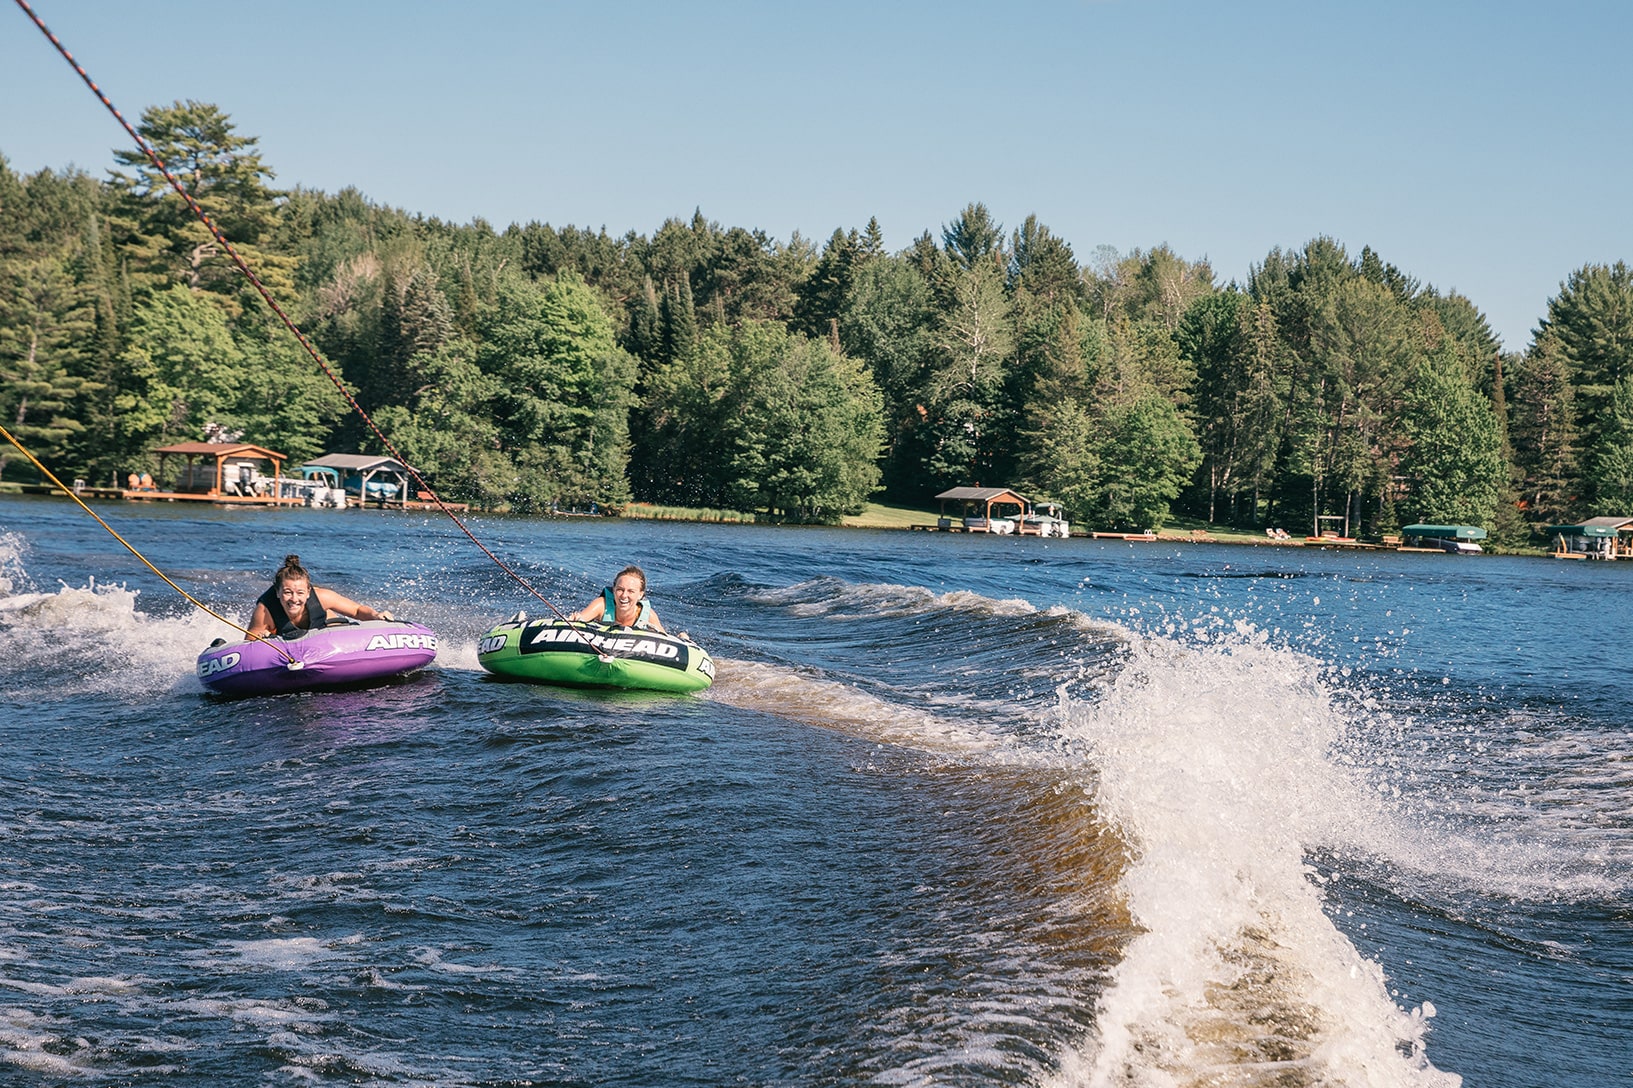 Two people are tubing on a lake, each riding in an inflatable tube pulled by a boat, creating a wake. They are surrounded by a tree-lined shore and small lakeside cabins.